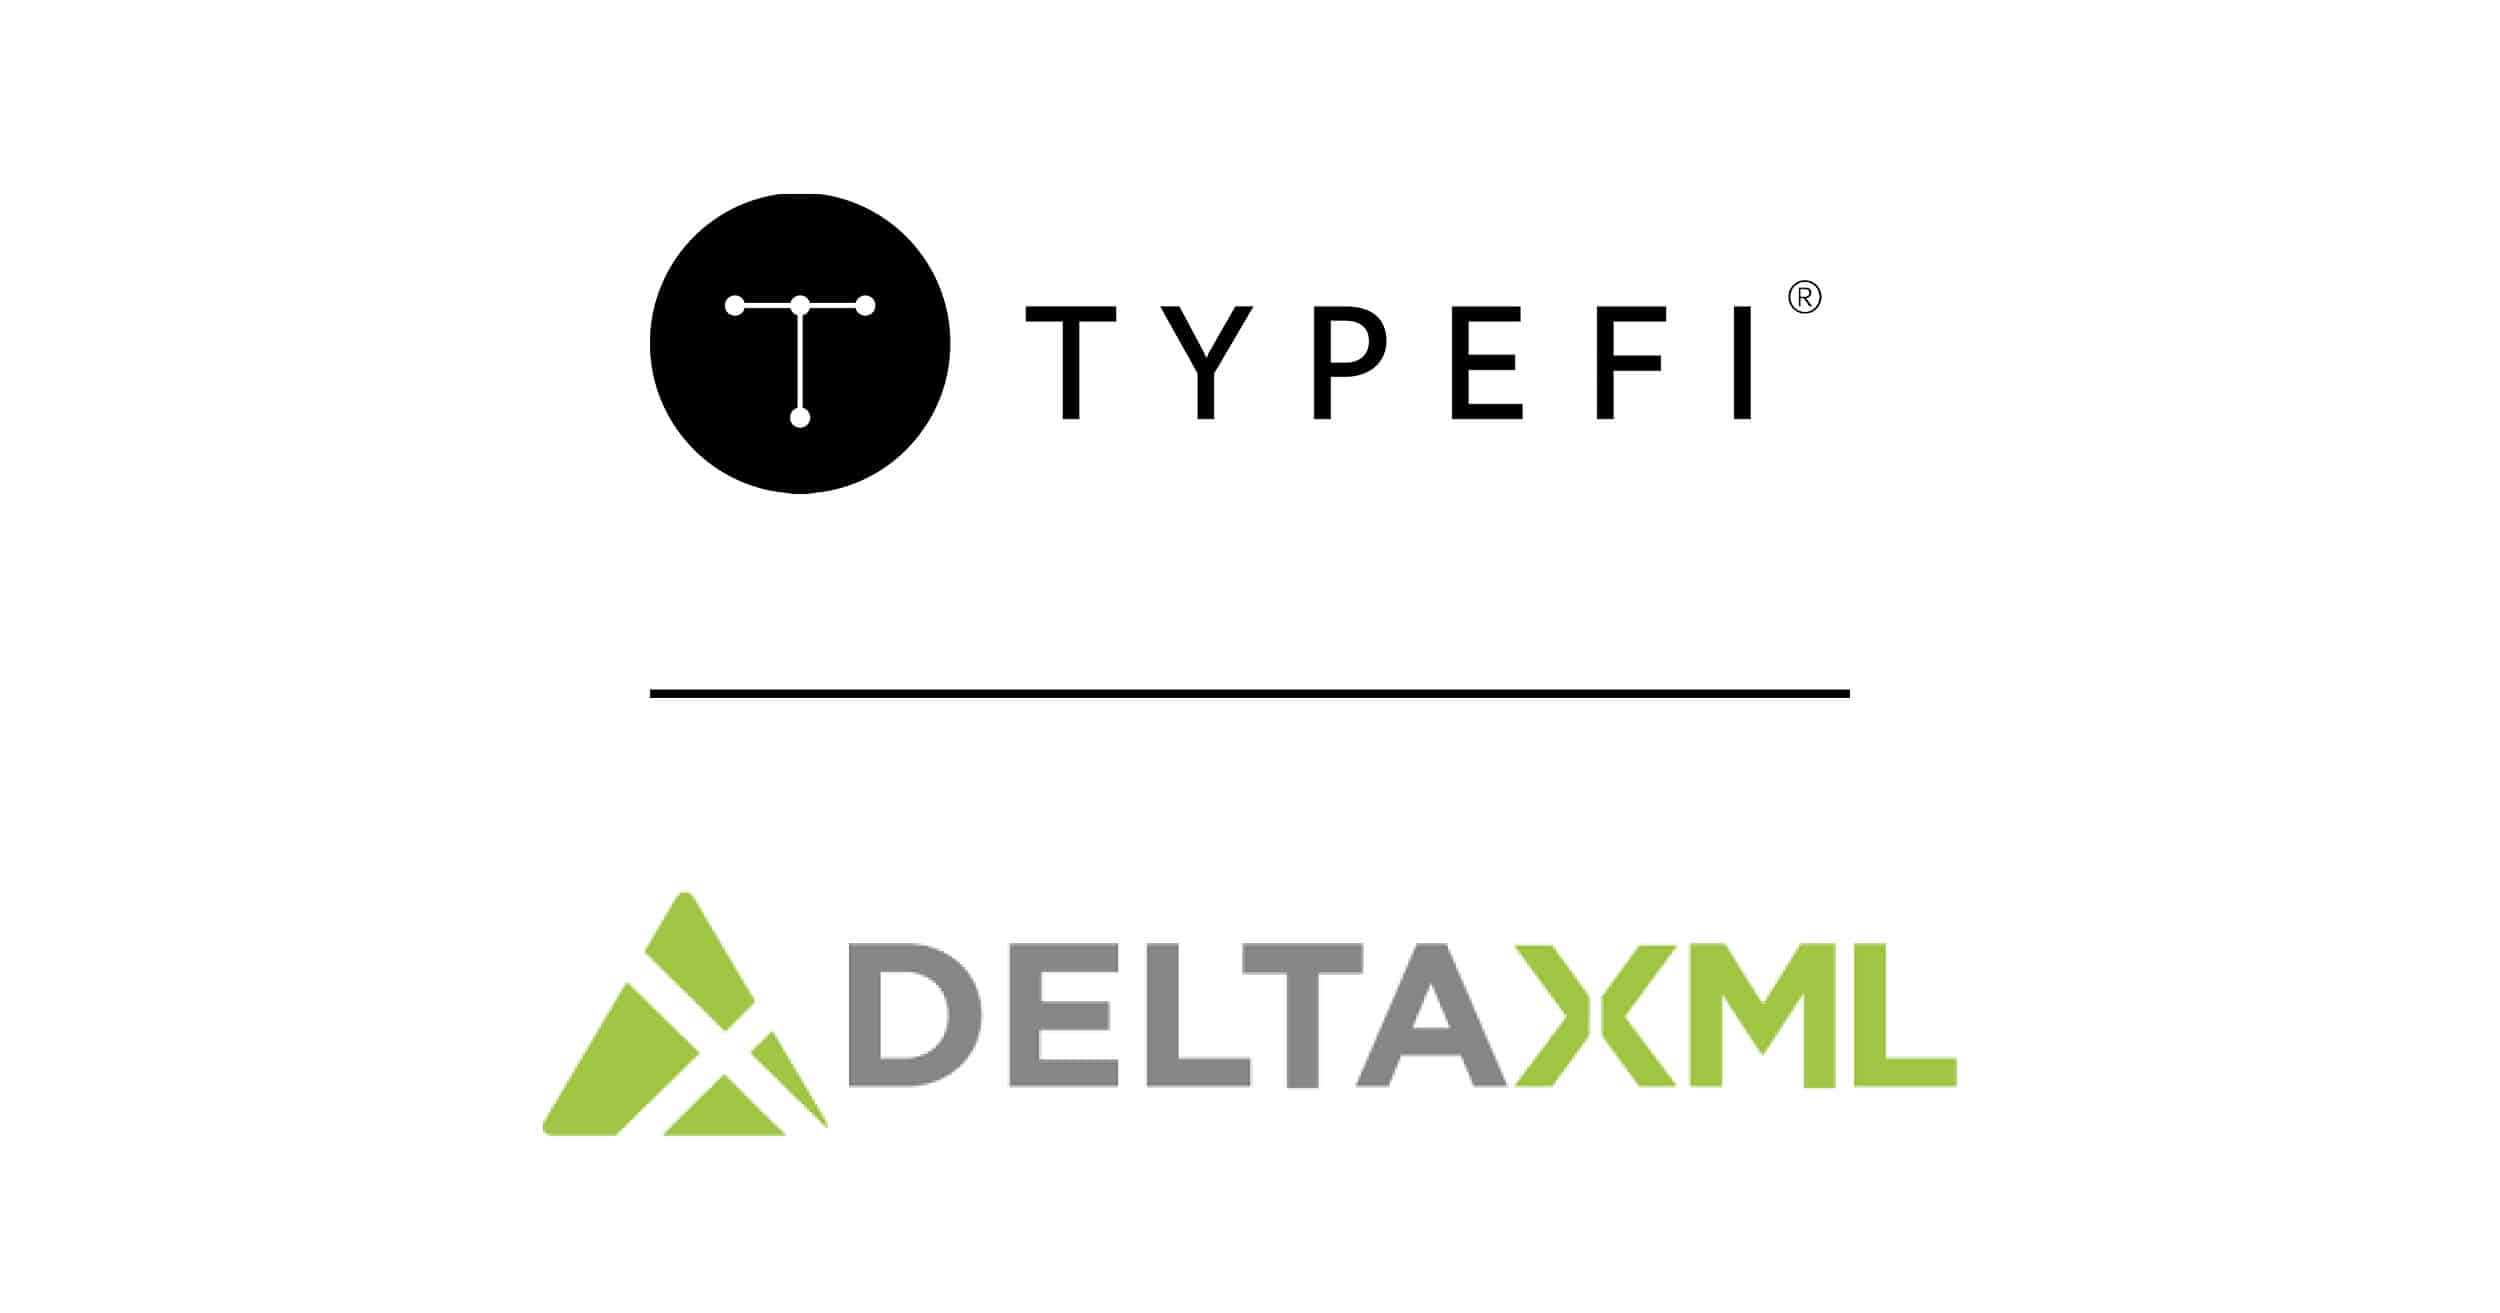 See changes easily in XML comparison PDF from Typefi and DeltaXML